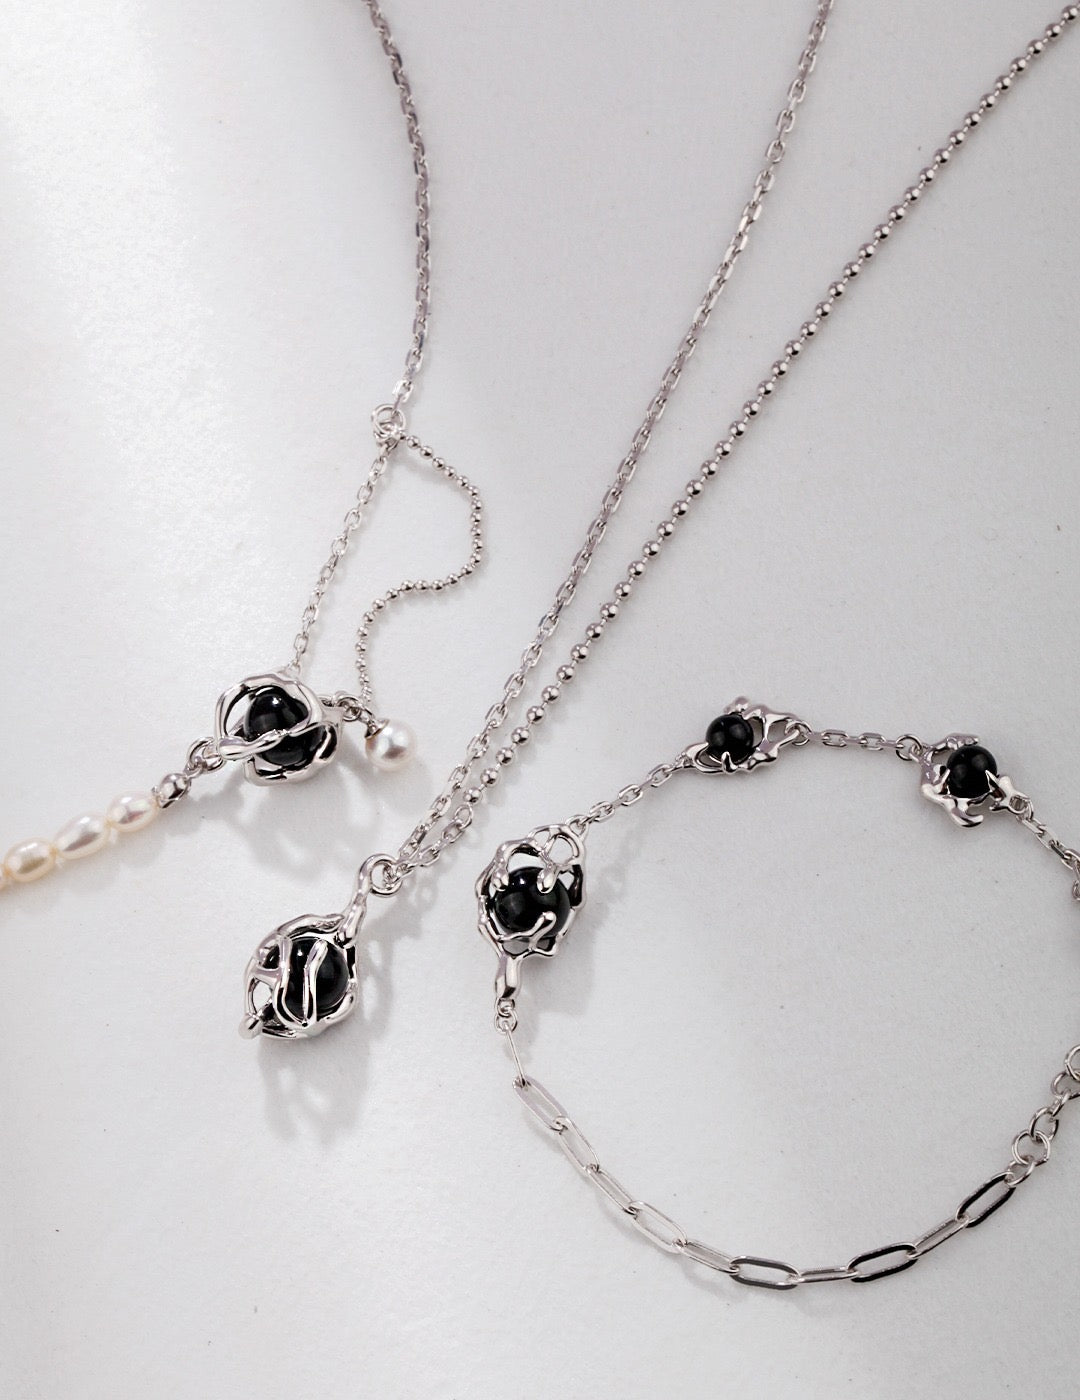 A set of Black Agate Necklace and Jewelry 